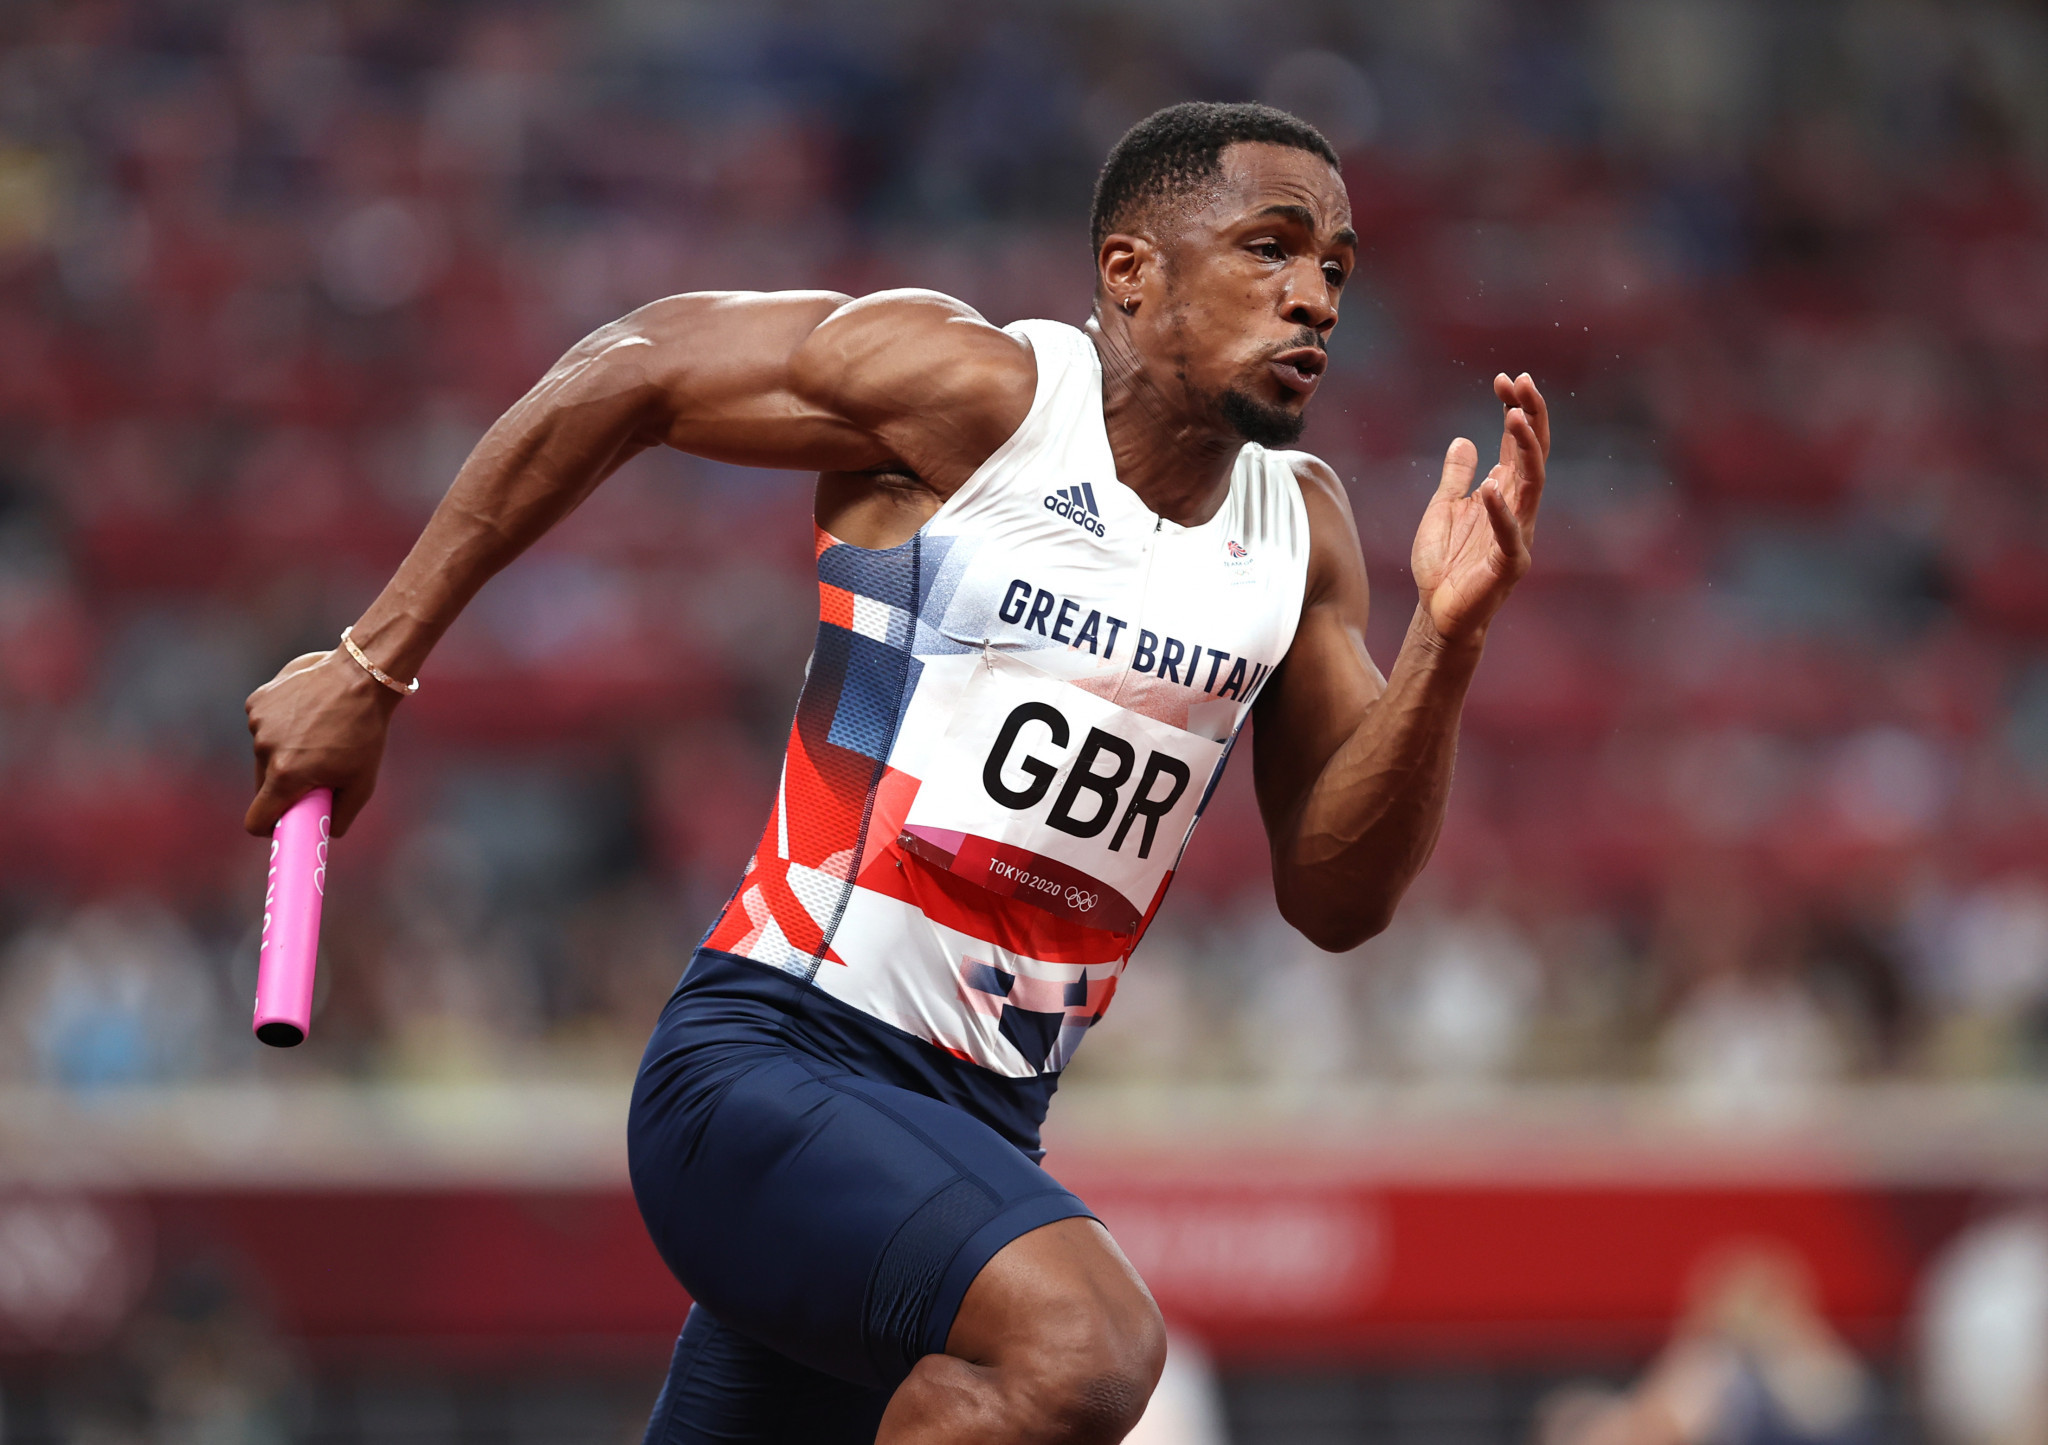 Britain's Chijindu Ujah has been banned for 22 months for doping ©Getty Images